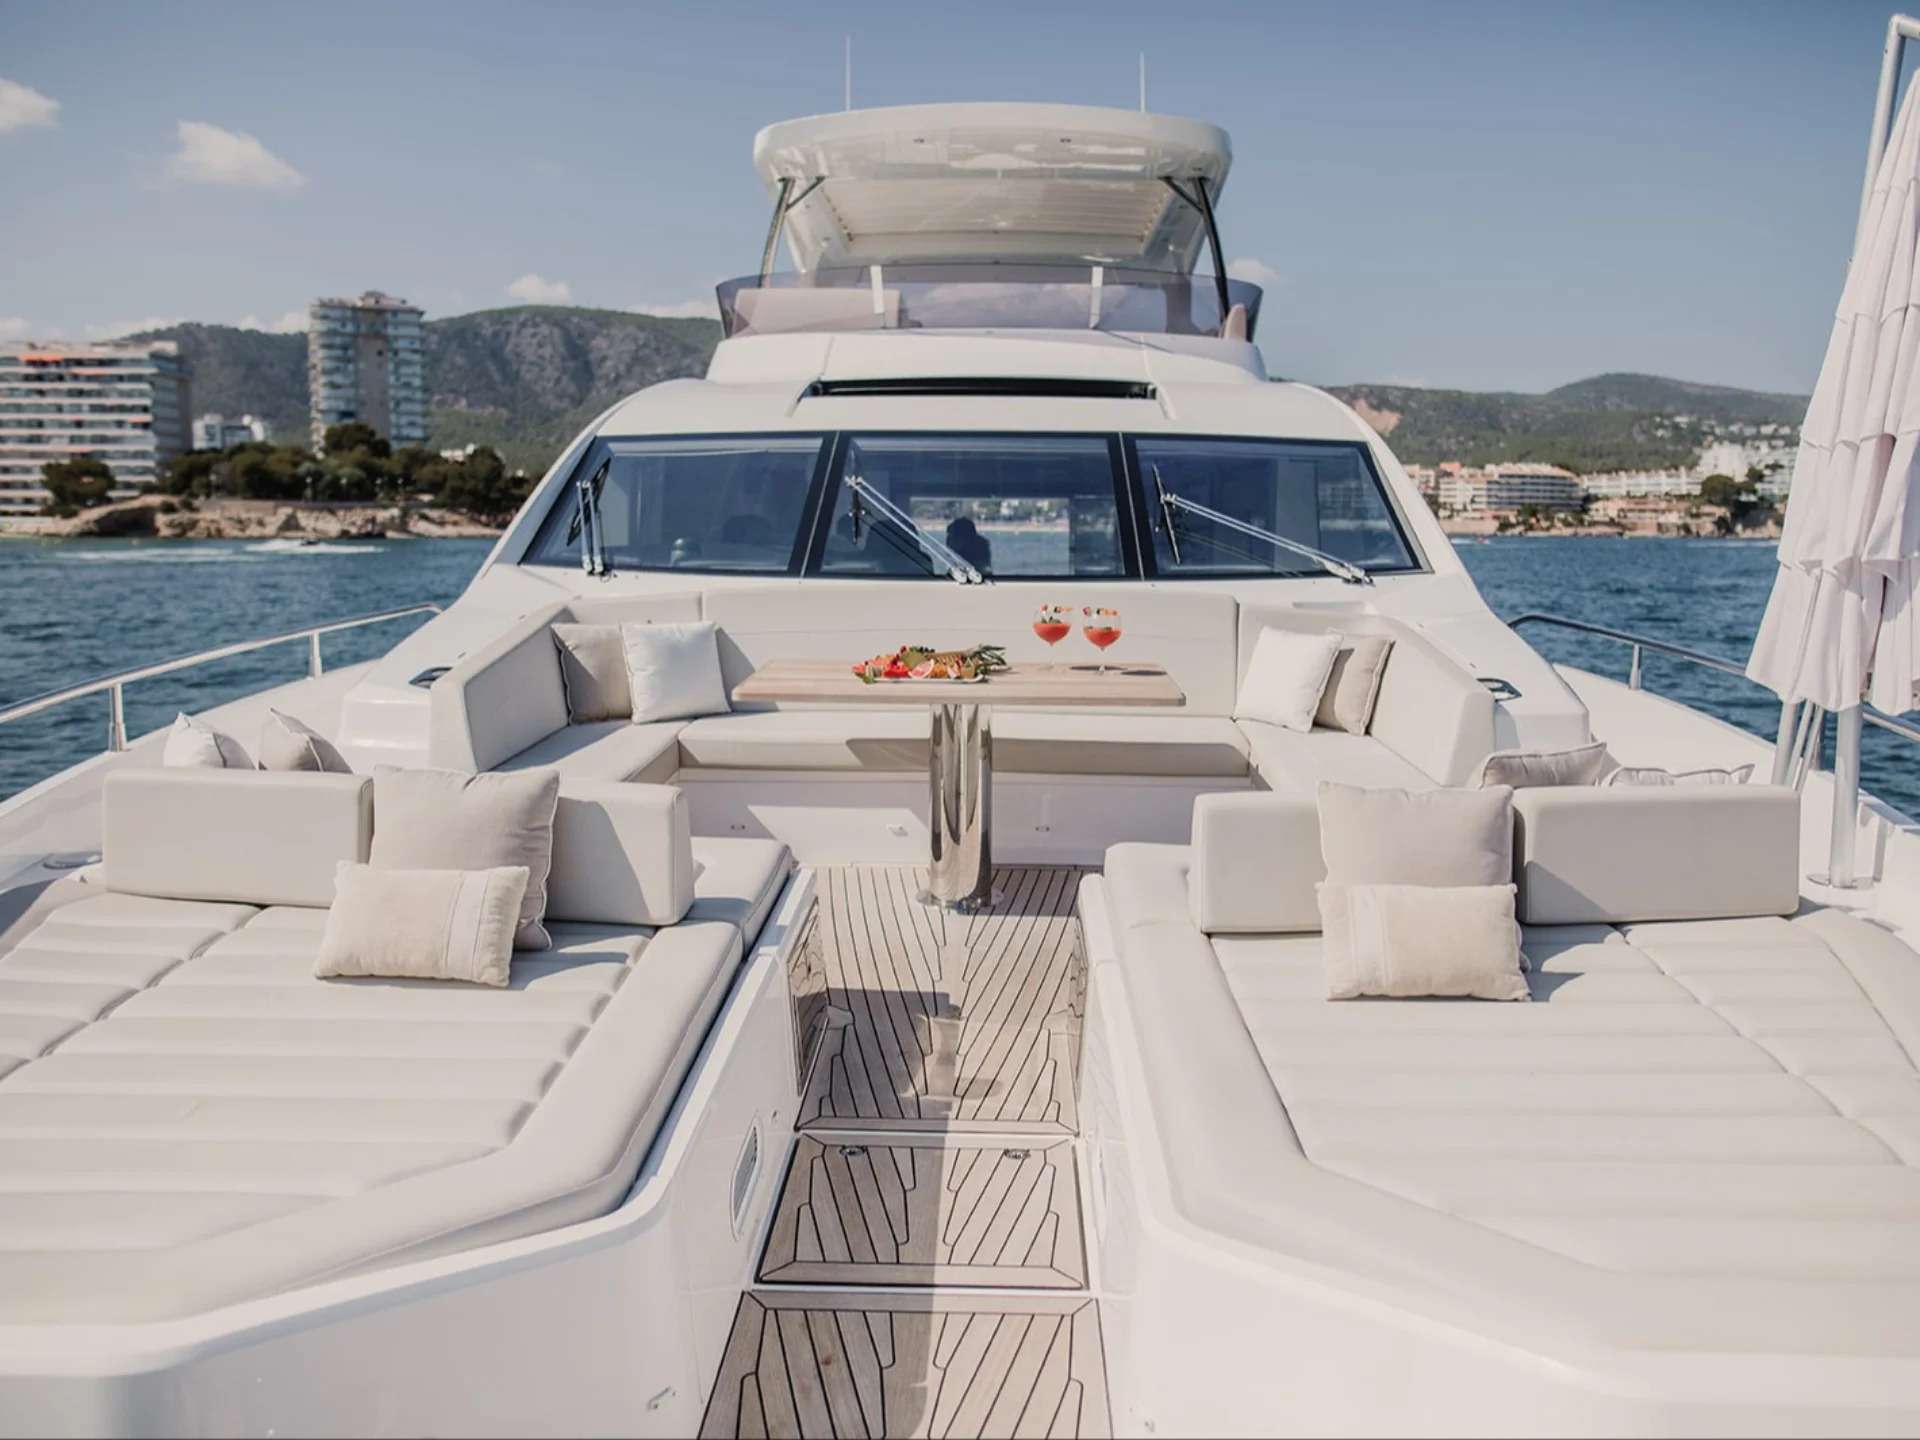 LADY M - Yacht Charter Brbinj & Boat hire in W. Med -Naples/Sicily, W. Med -Riviera/Cors/Sard., W. Med - Spain/Balearics 4